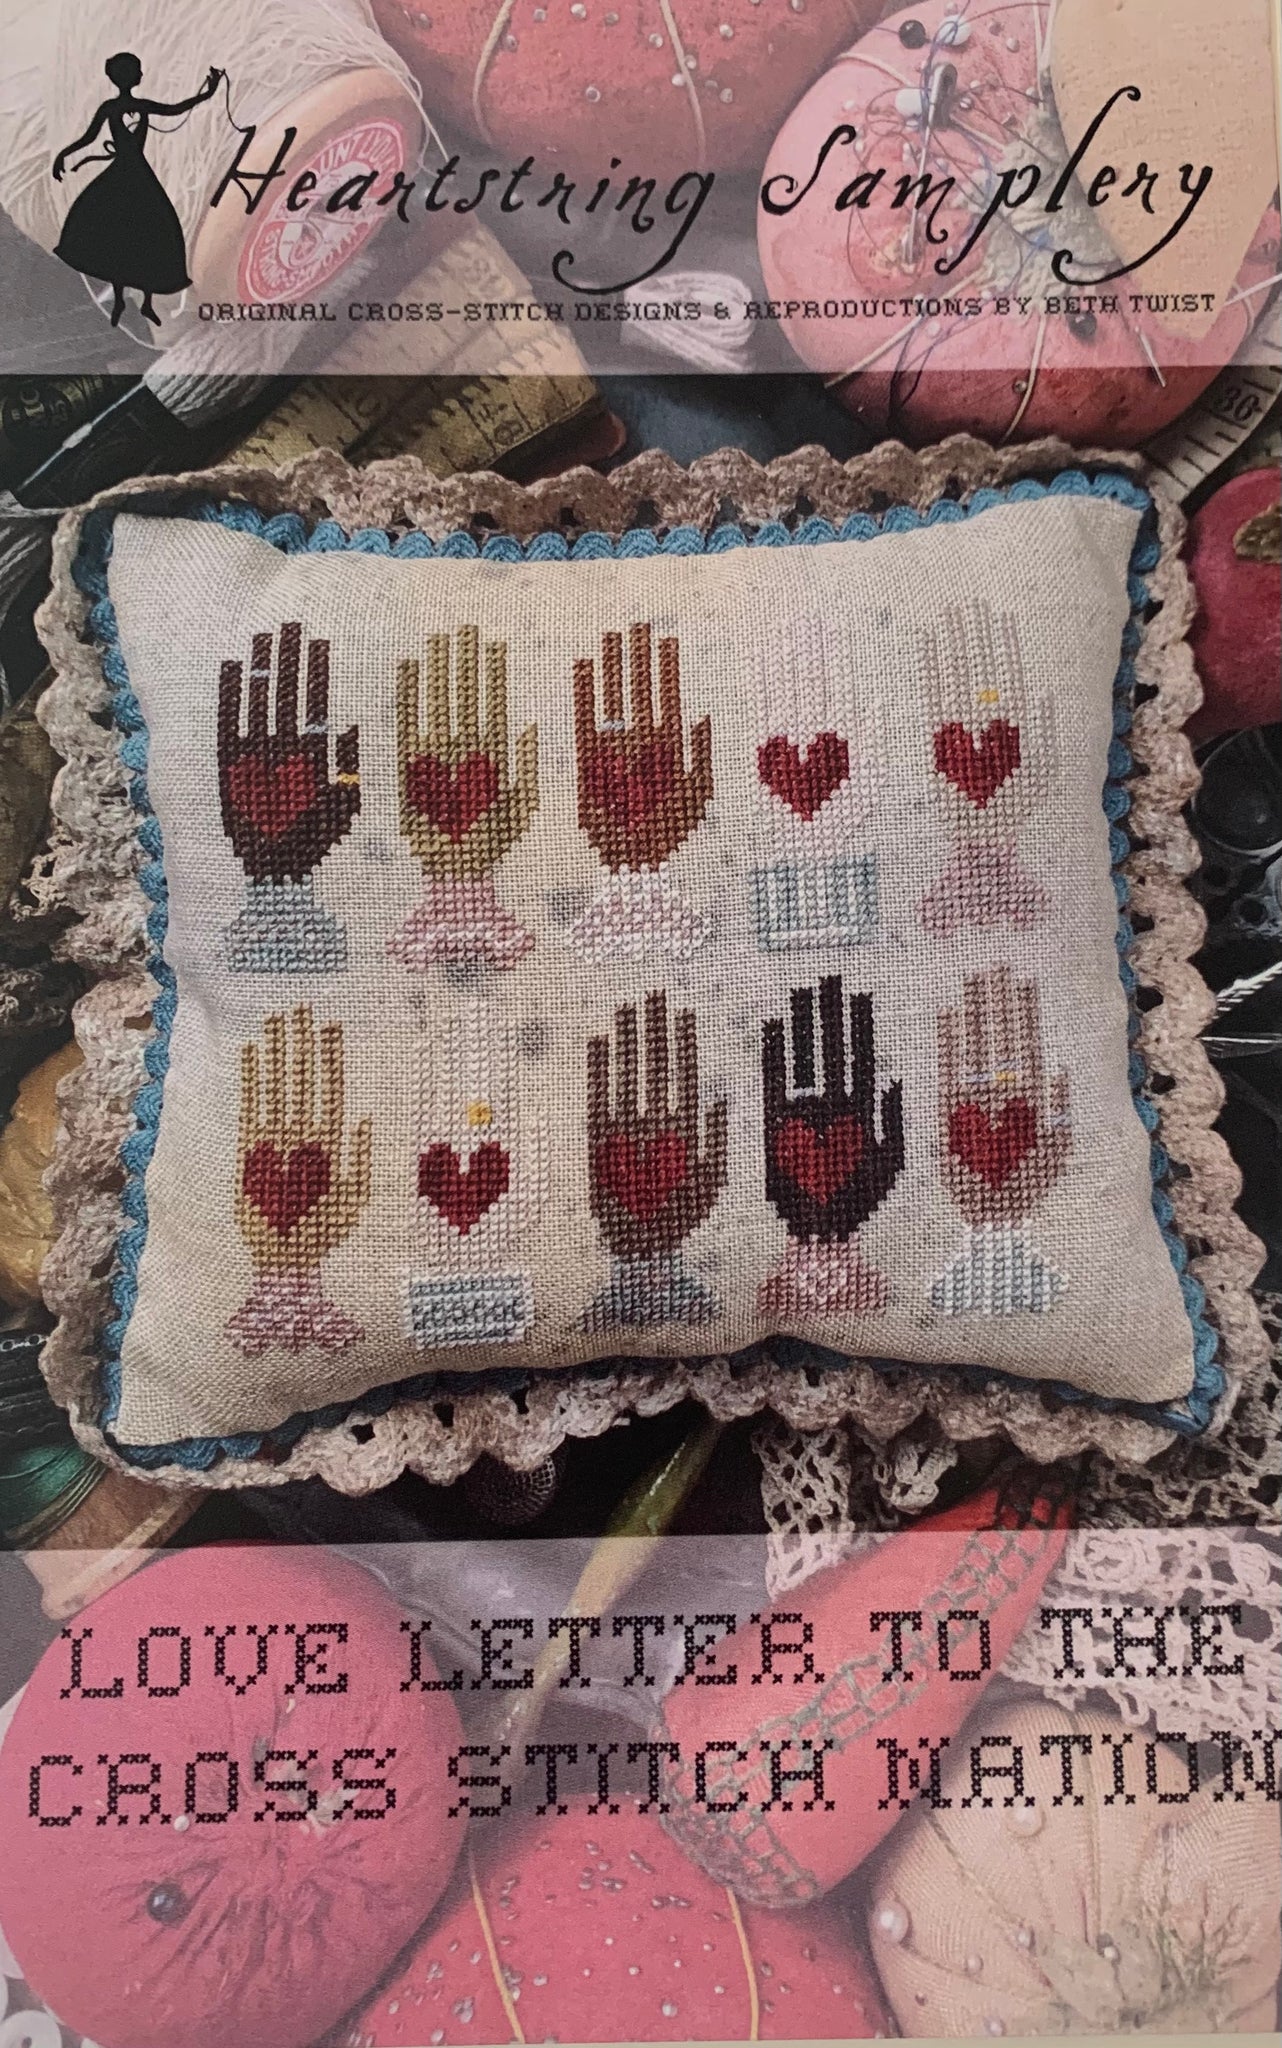 Love Letter to the Cross Stitch Nation by Heartstring Samplery